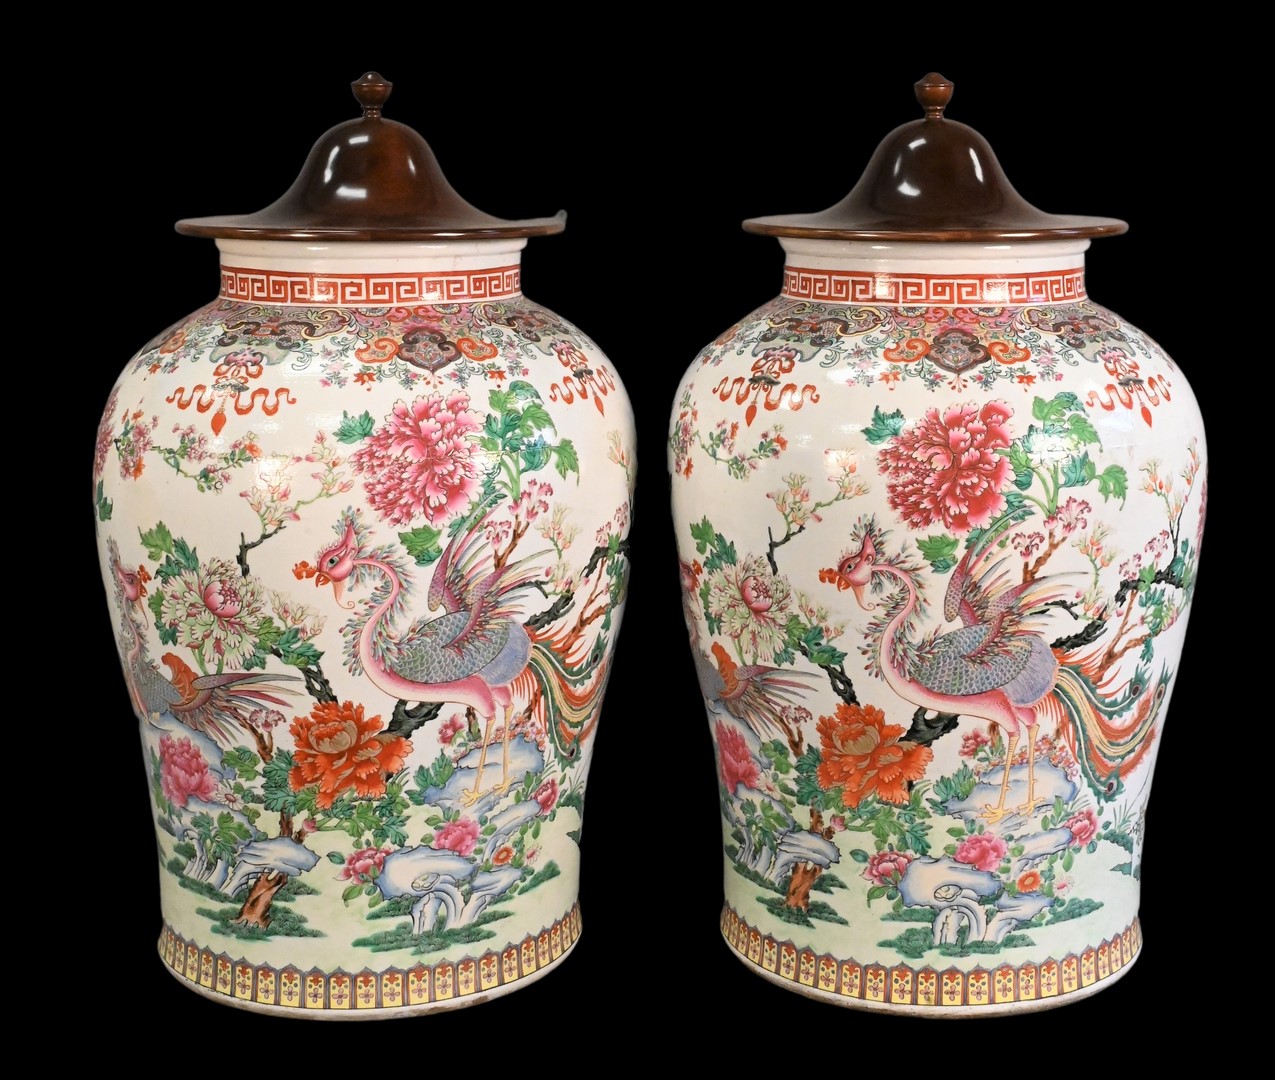 Annual Major Fall Americana and Chinese Auction